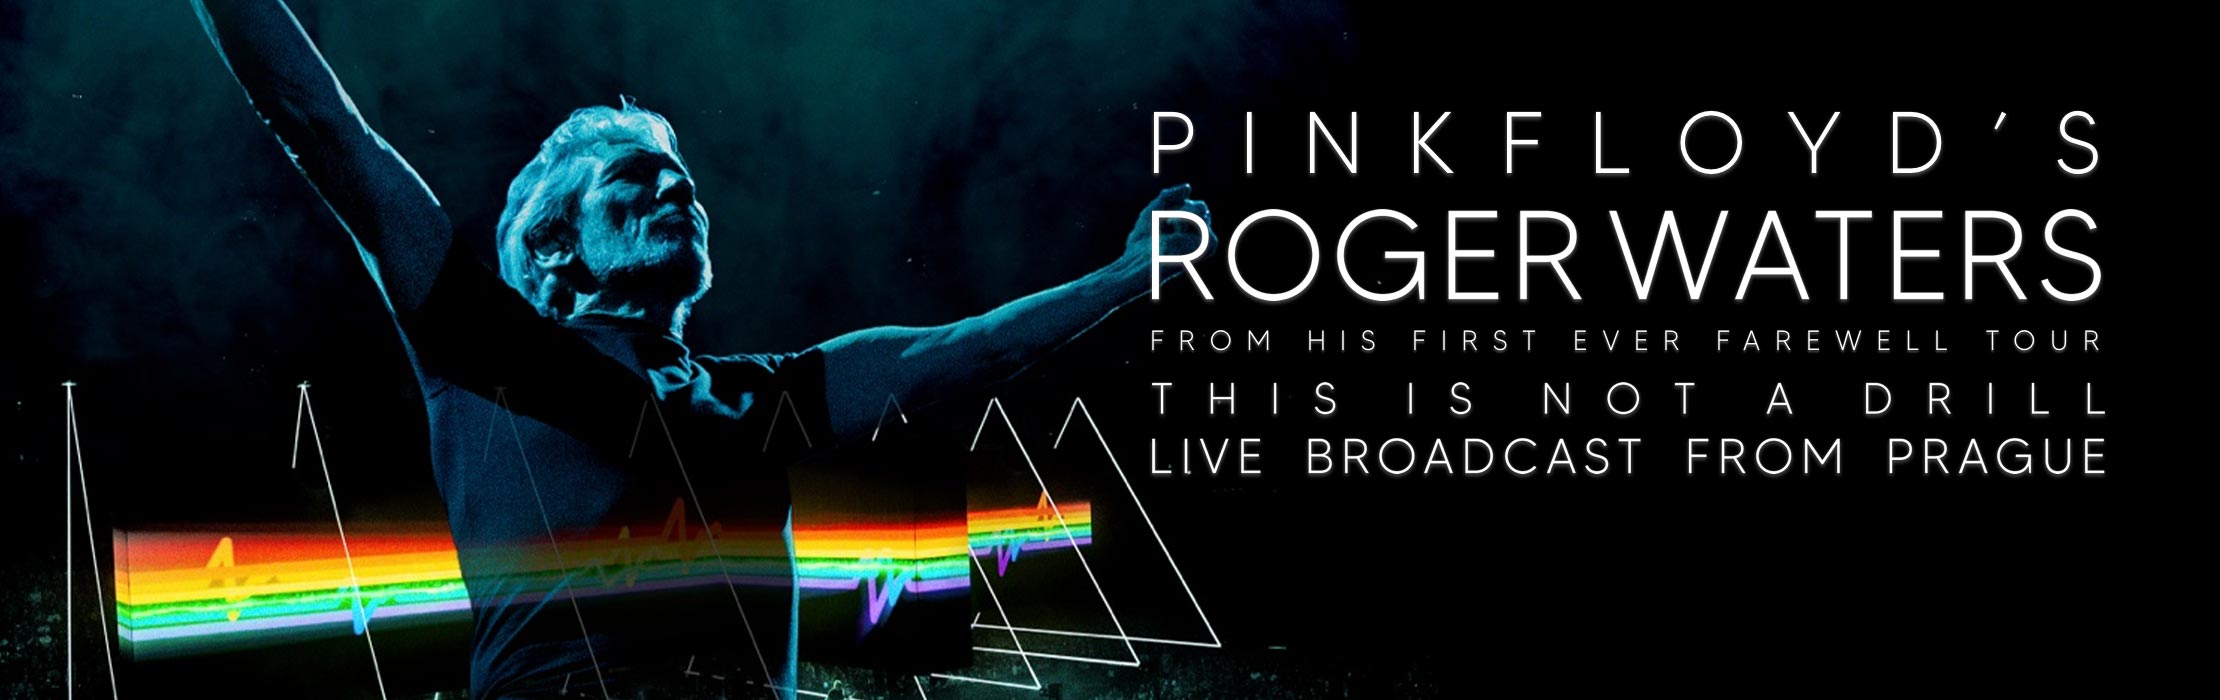 Roger Waters Live From Prague